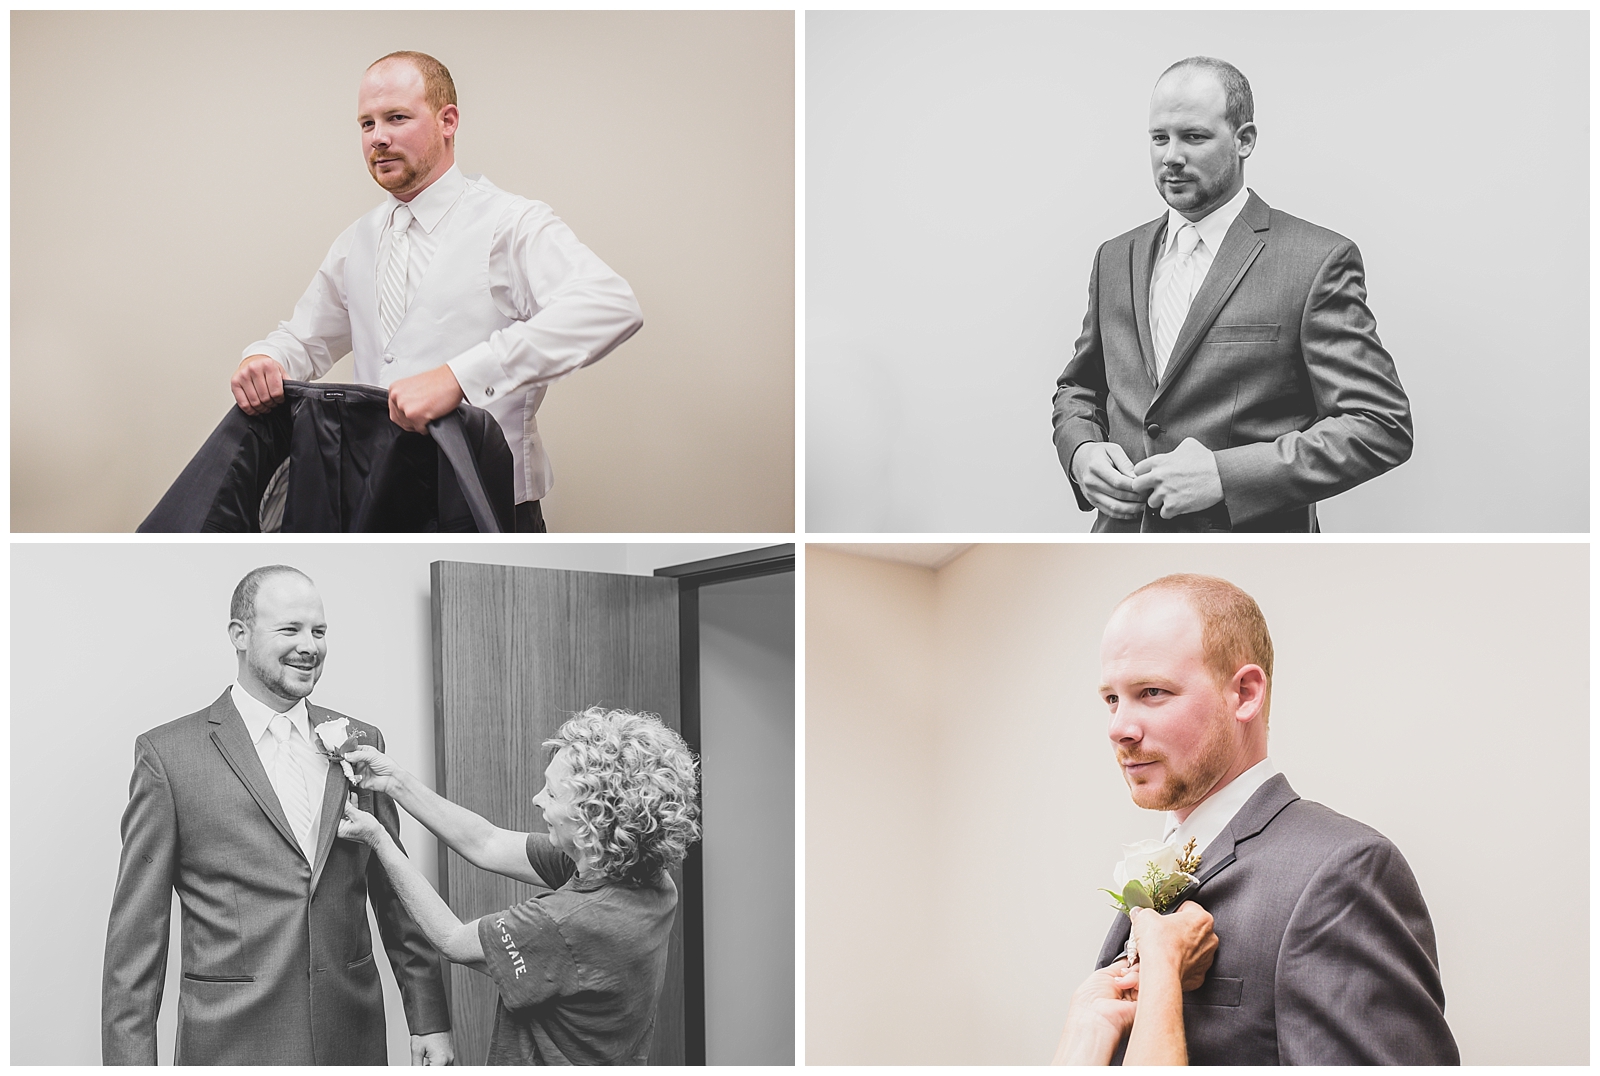 Wedding photography in Trousdale, Kansas, by Kansas City wedding photographers Wisdom-Watson Weddings.